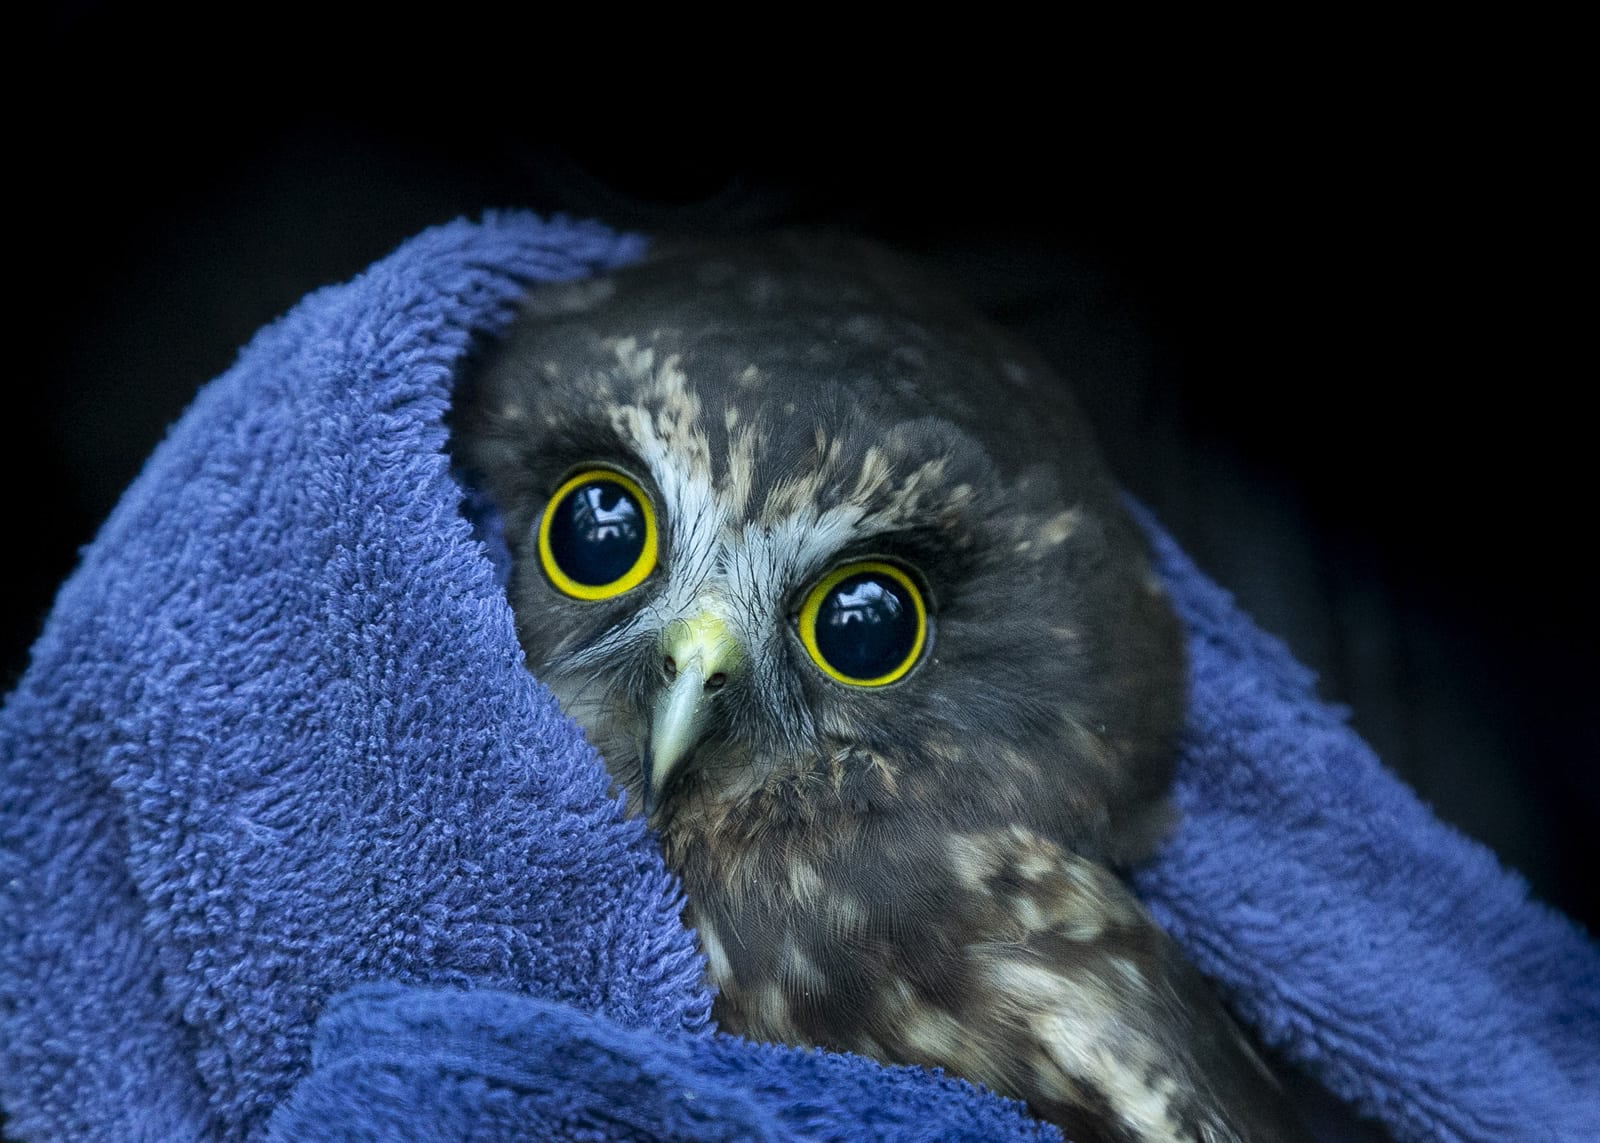 Introducing: Owls in Towels!